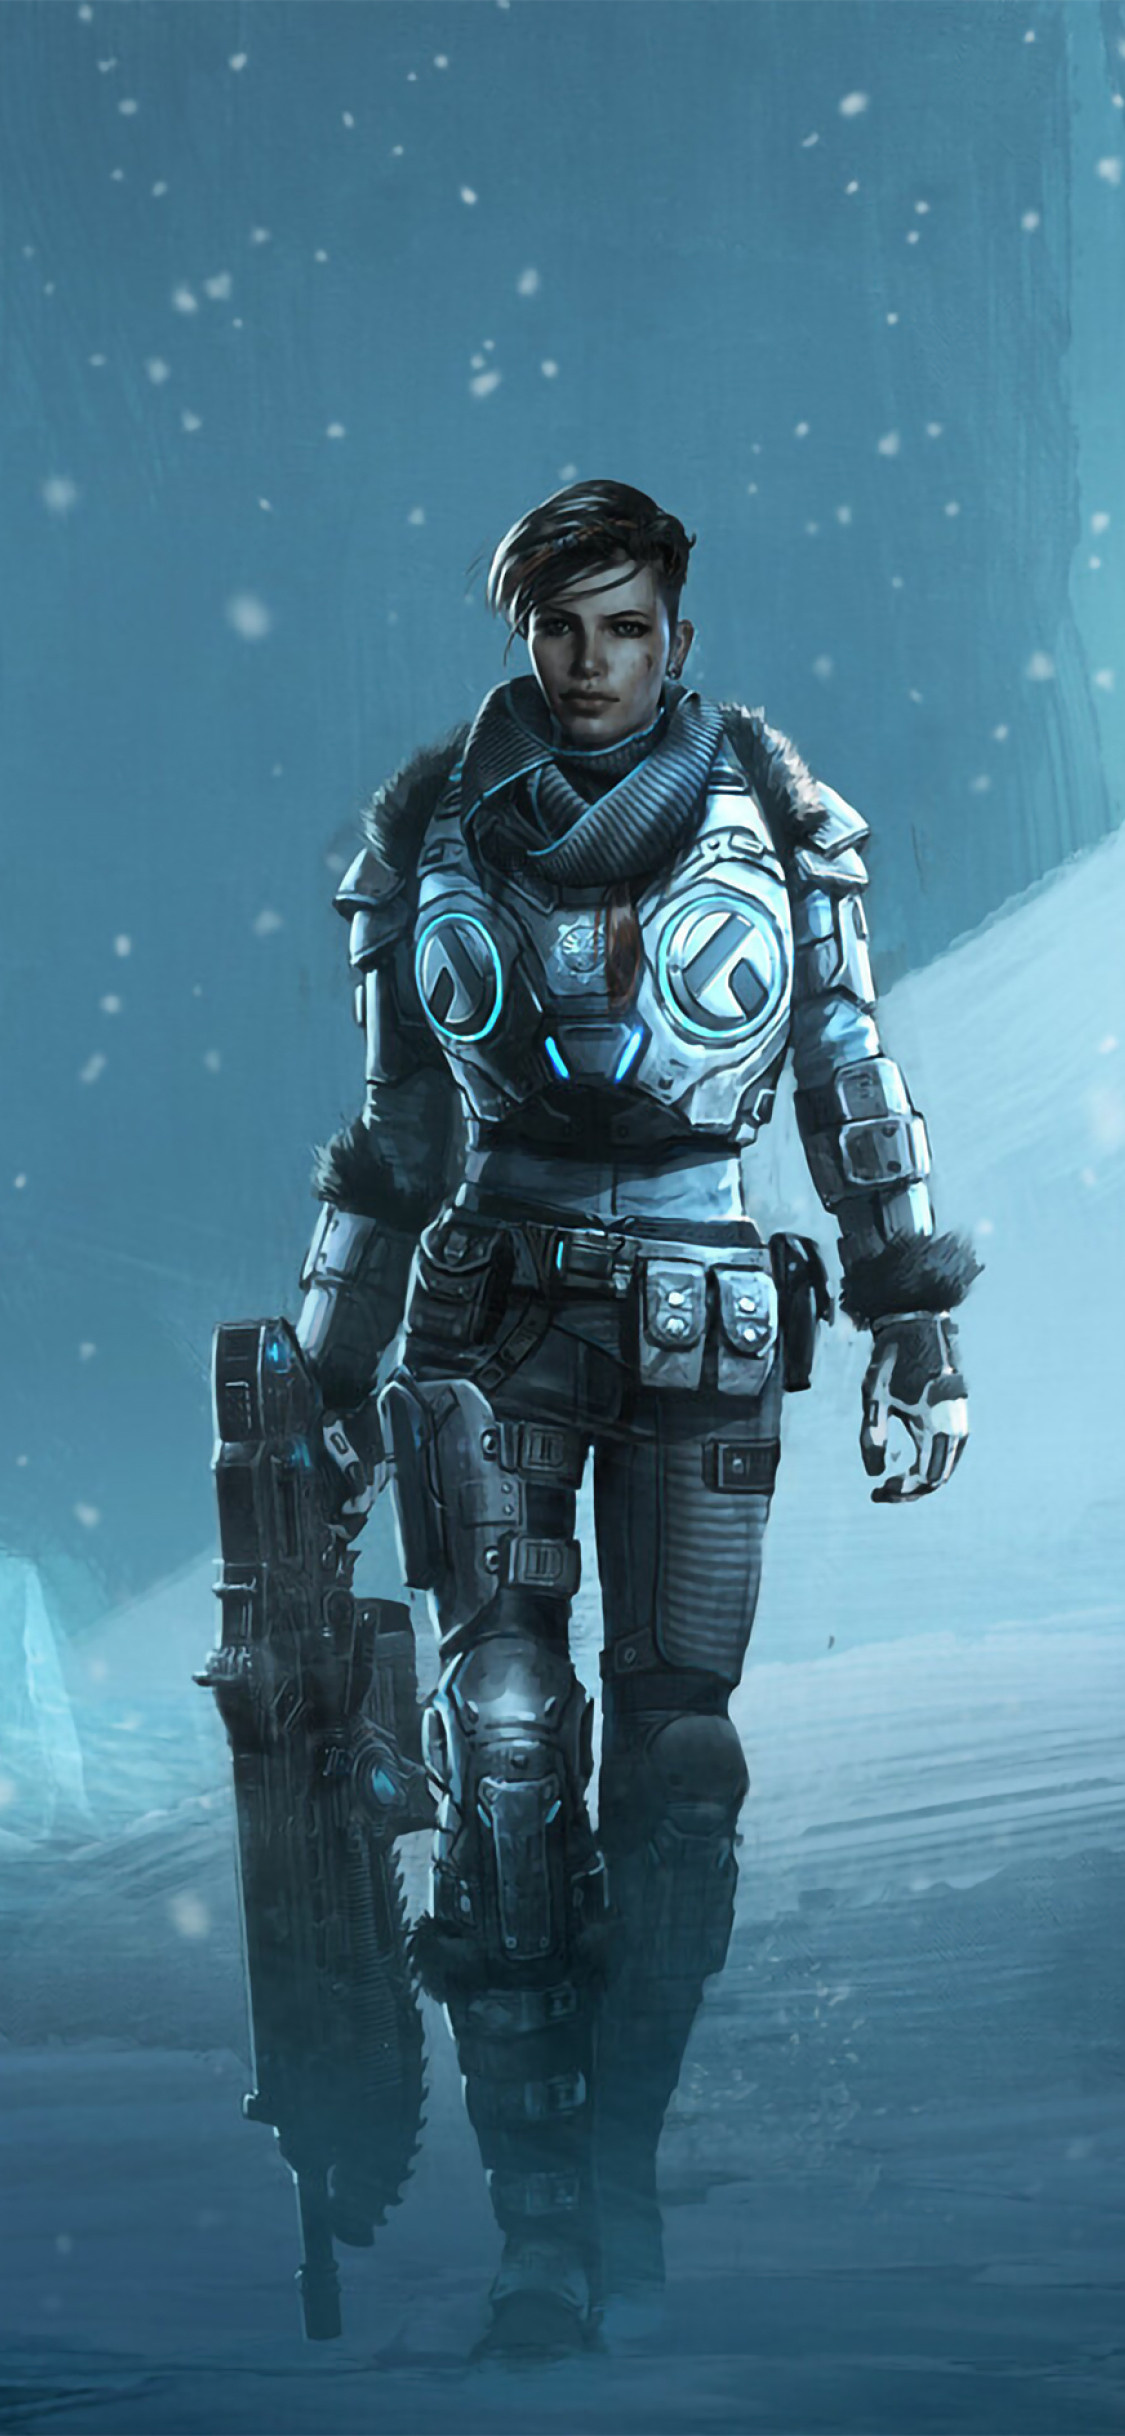 Gears 5, Gaming, Phone wallpapers, Phone backgrounds, 1130x2440 HD Phone